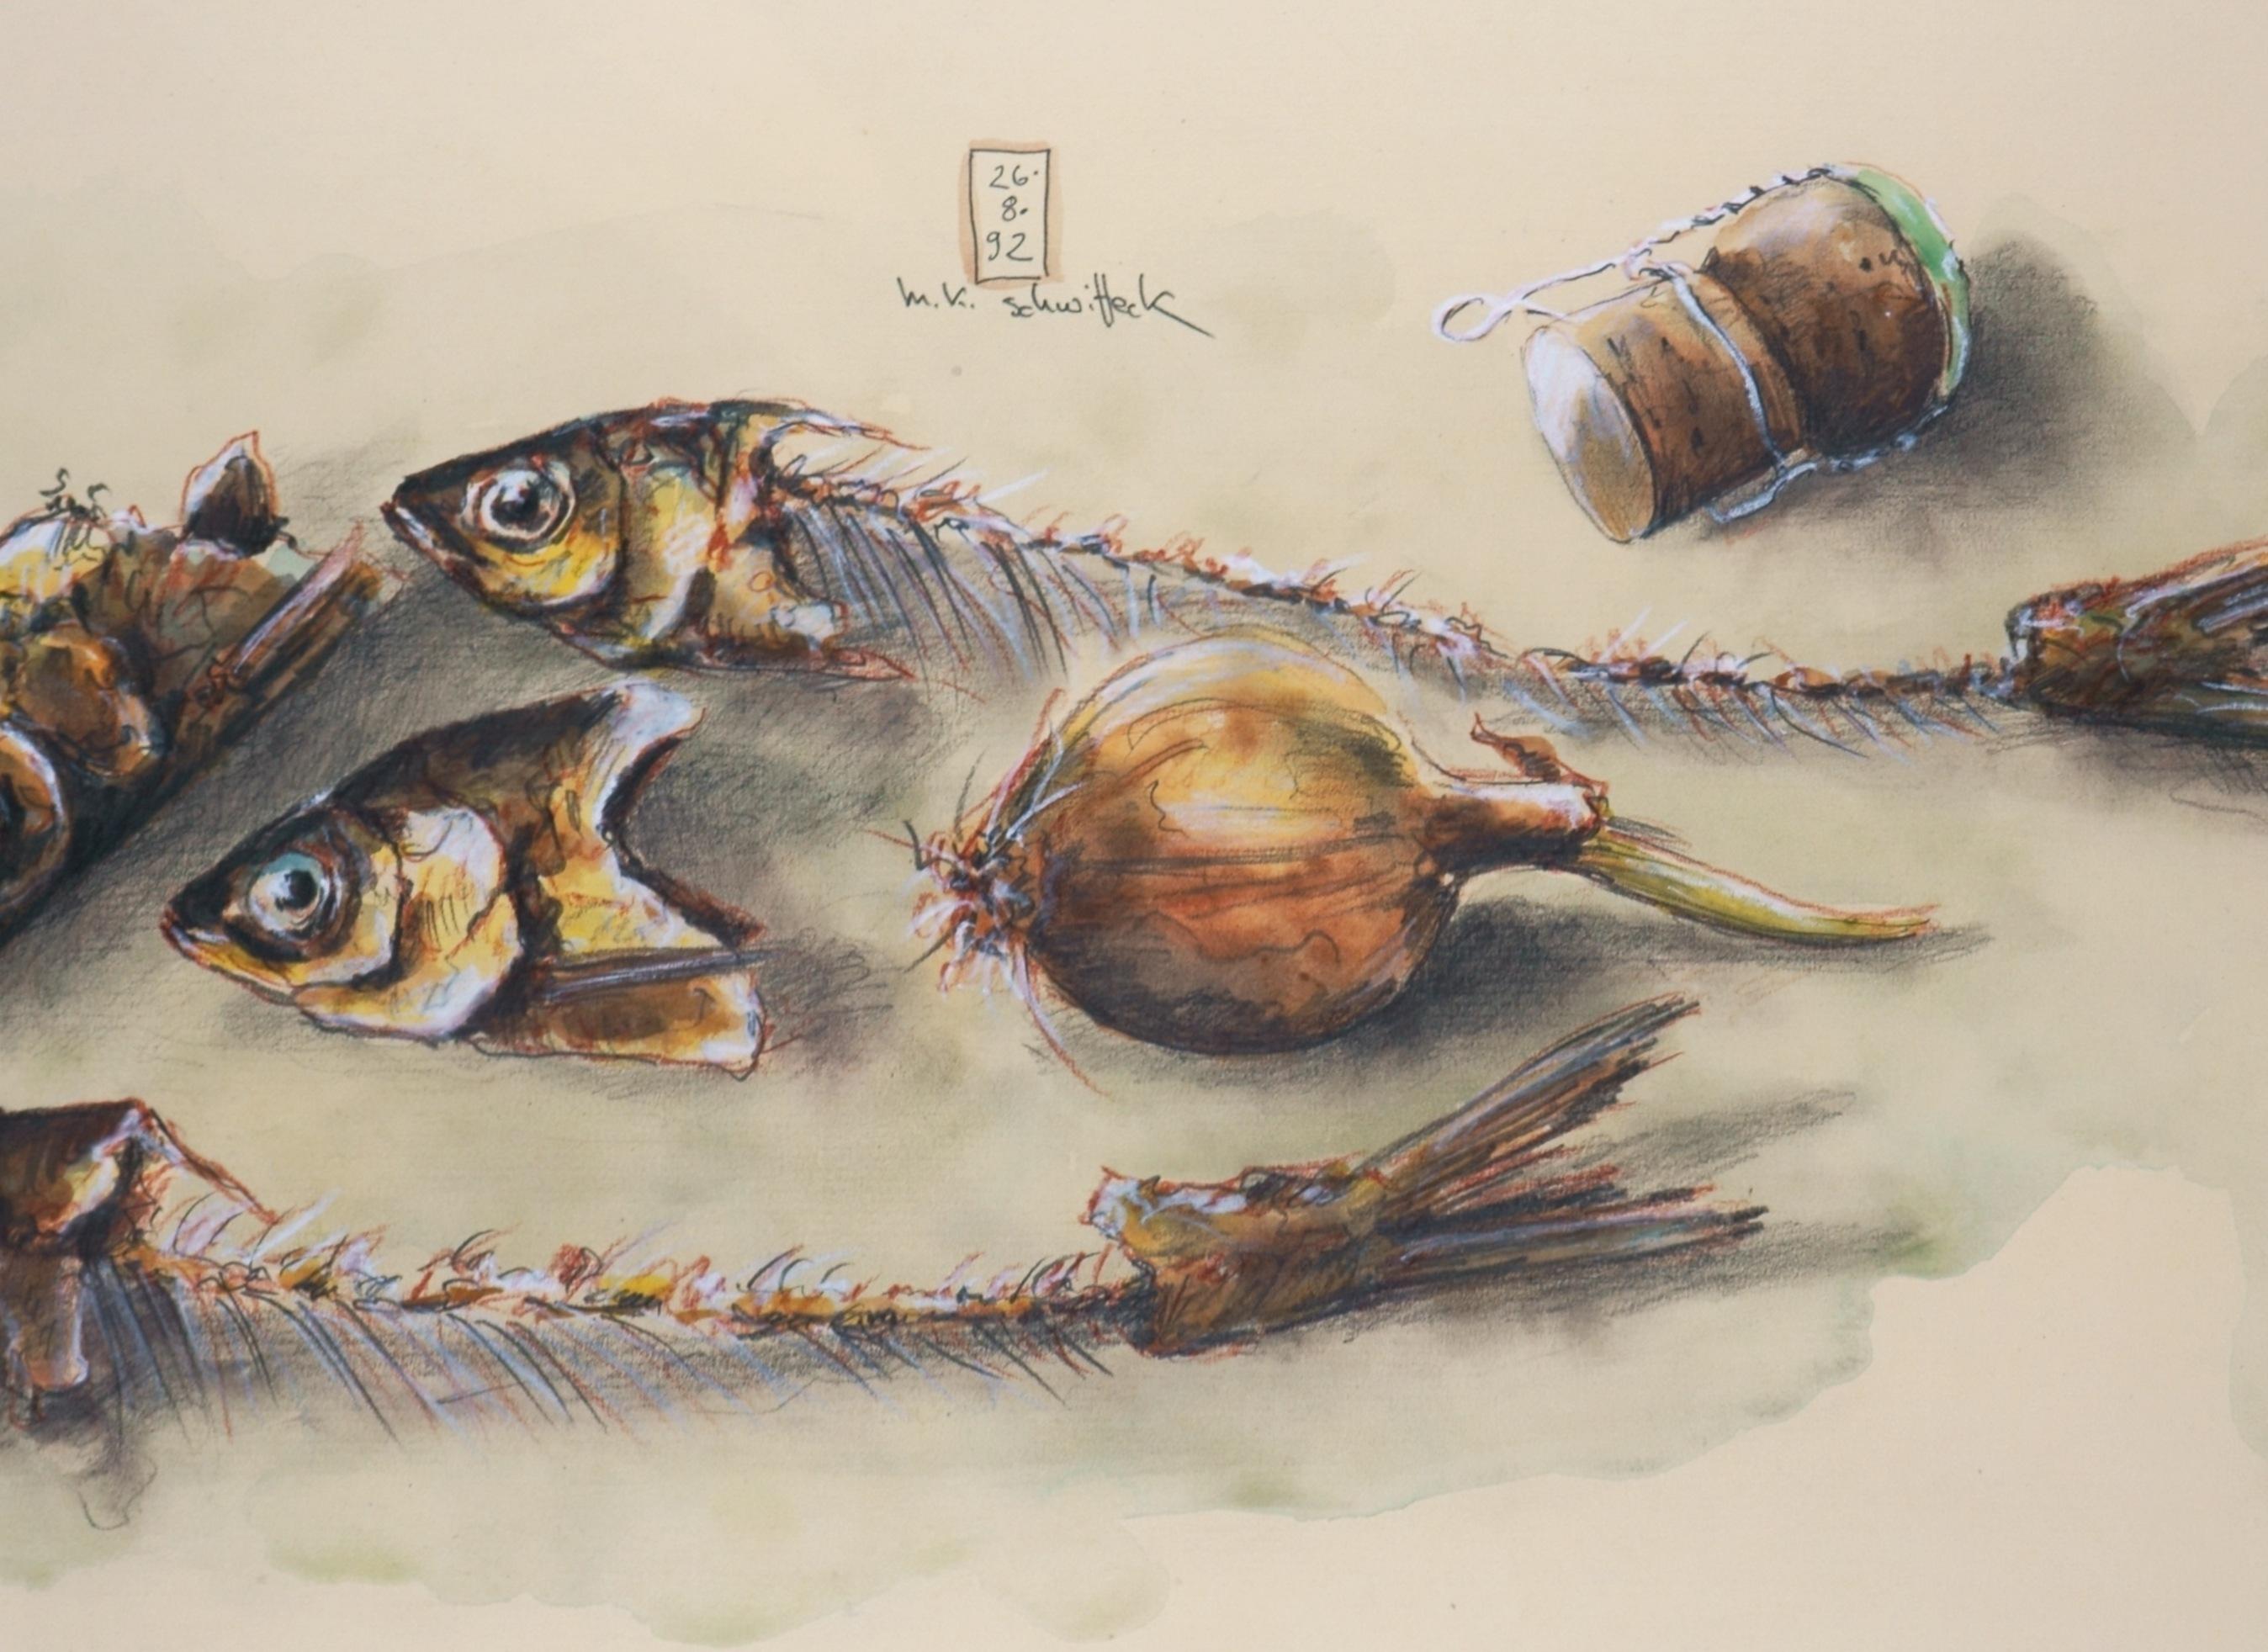 Still life with fish bones, pencil and pencil sharpener - Art by Manfred K. Schwitteck